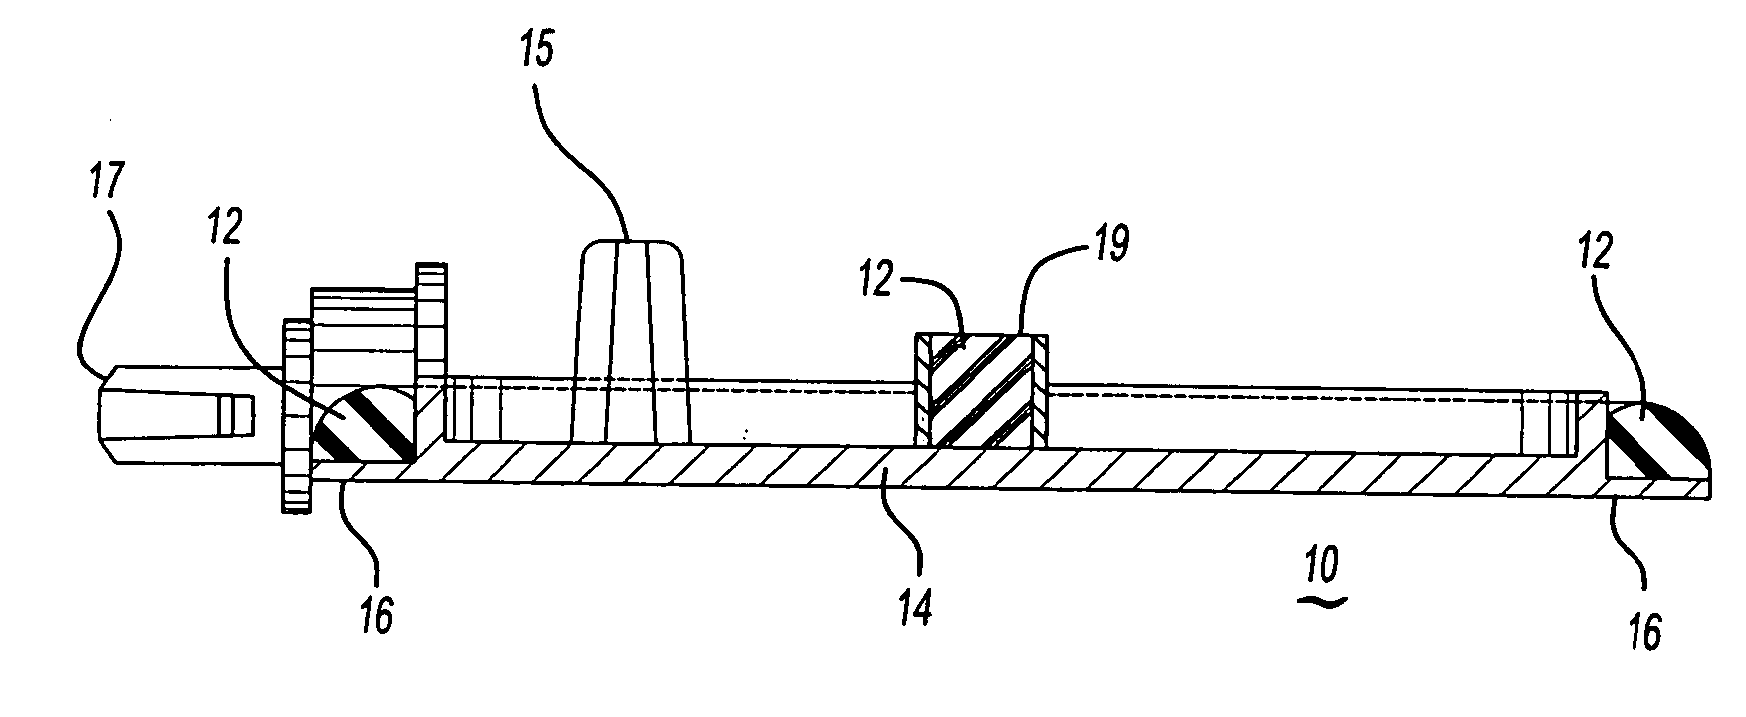 System and method for manufacturing physical barriers